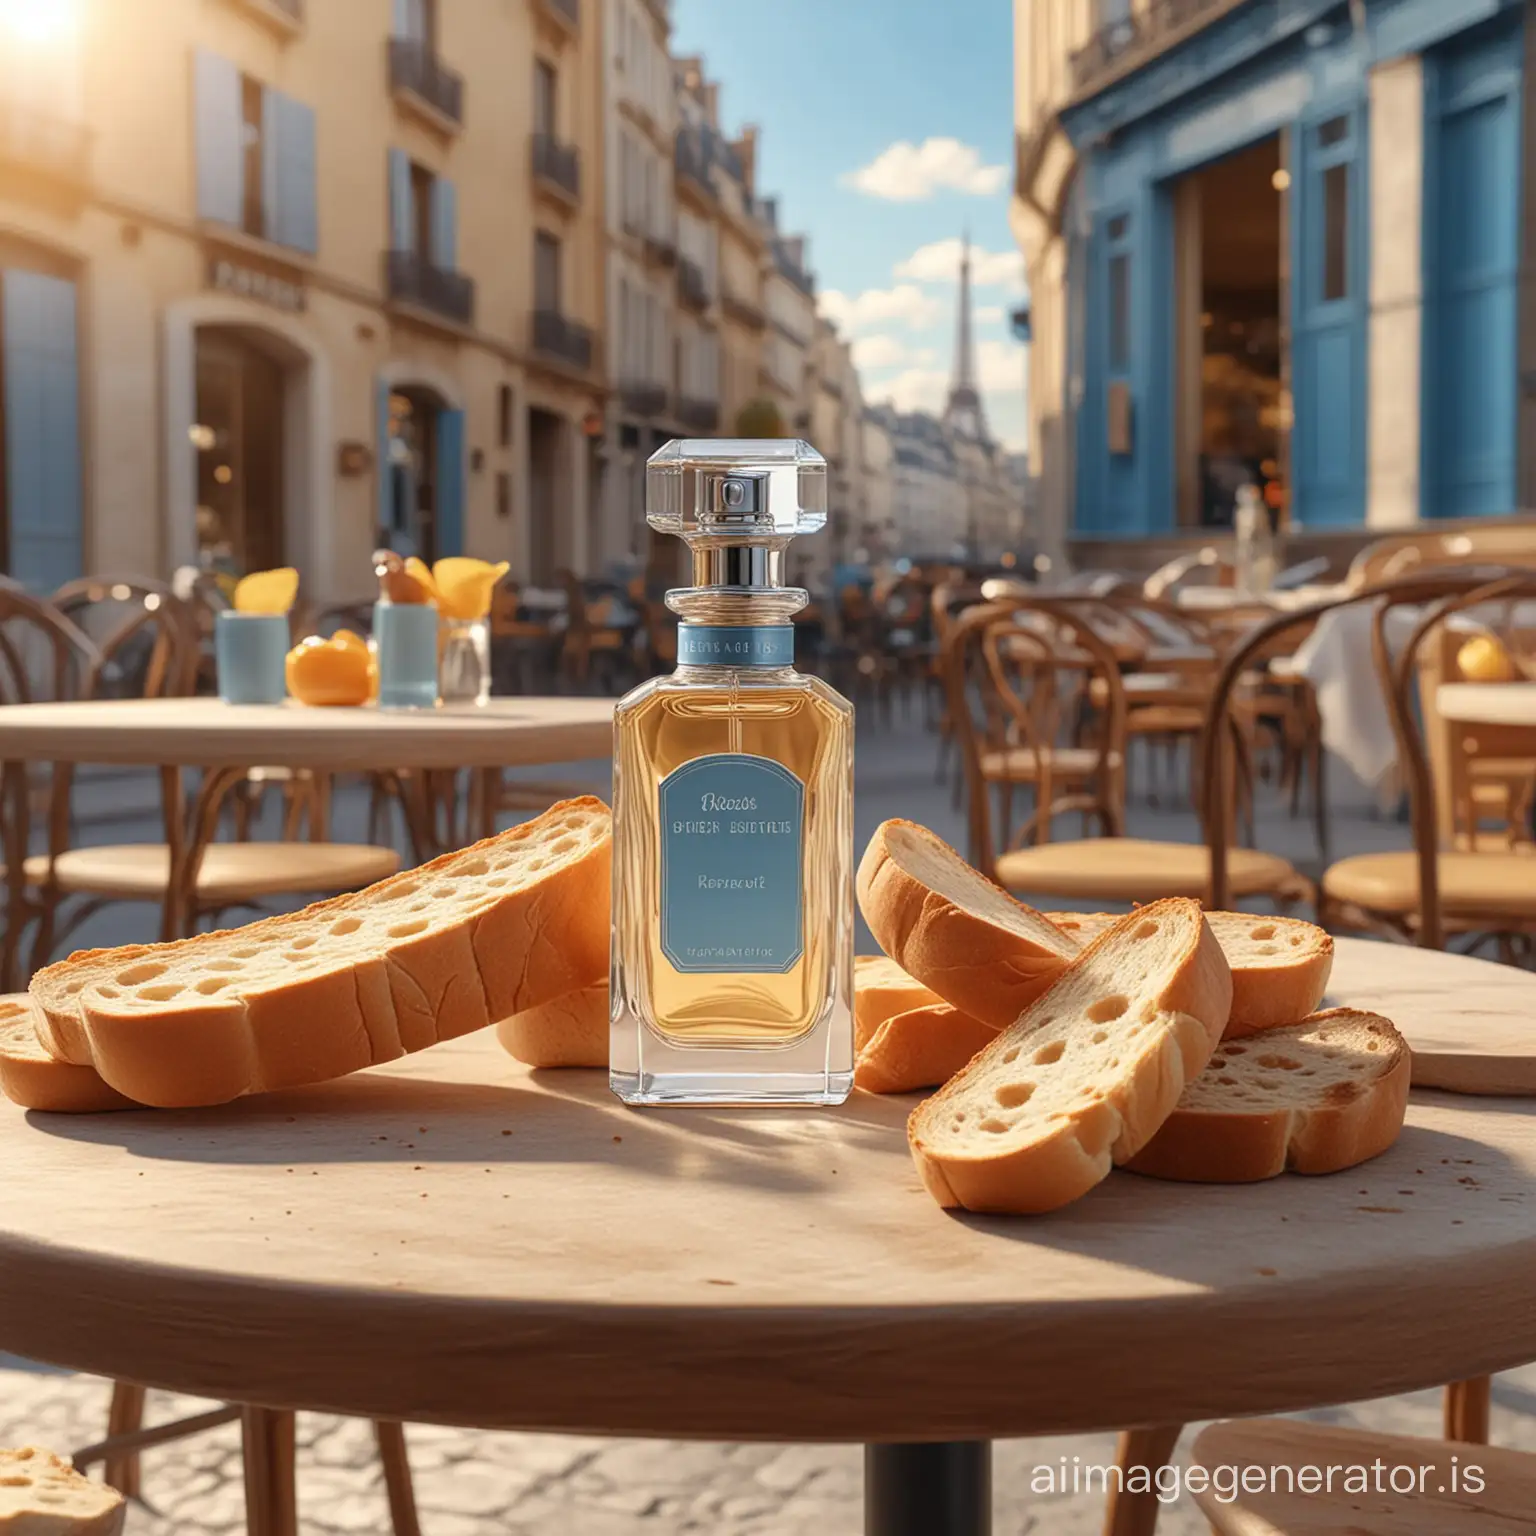 Luxurious-Perfume-Product-Display-on-Parisian-Cafe-Table-with-Baguette-Bread